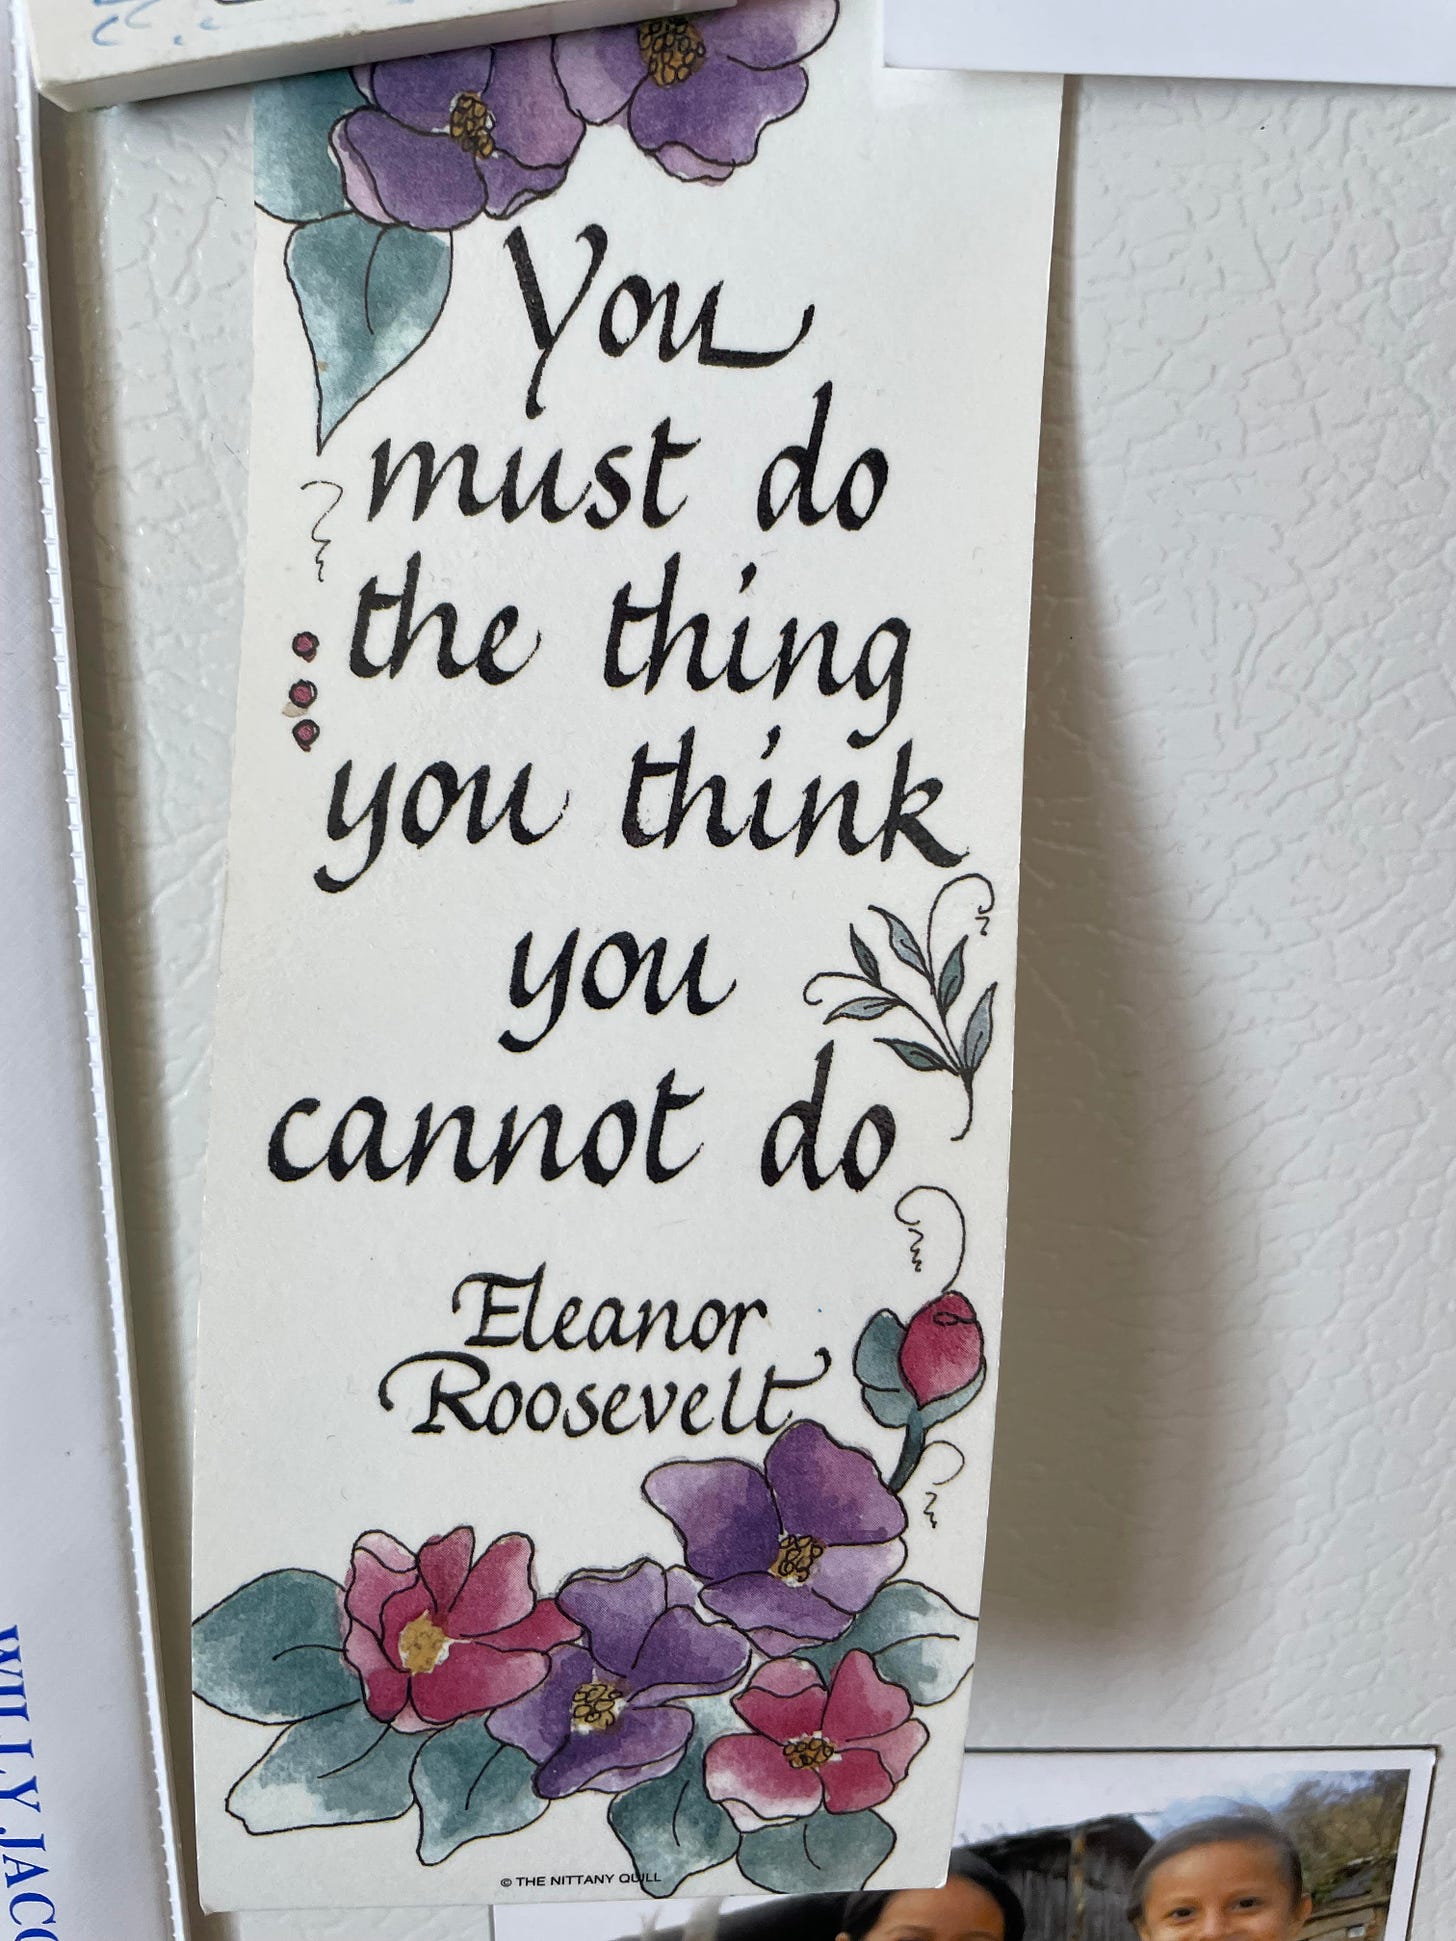 Bookmark with a quote by Eleanor Roosevelt, which says You must do the thing you think you cannot do, hanging on a fridge